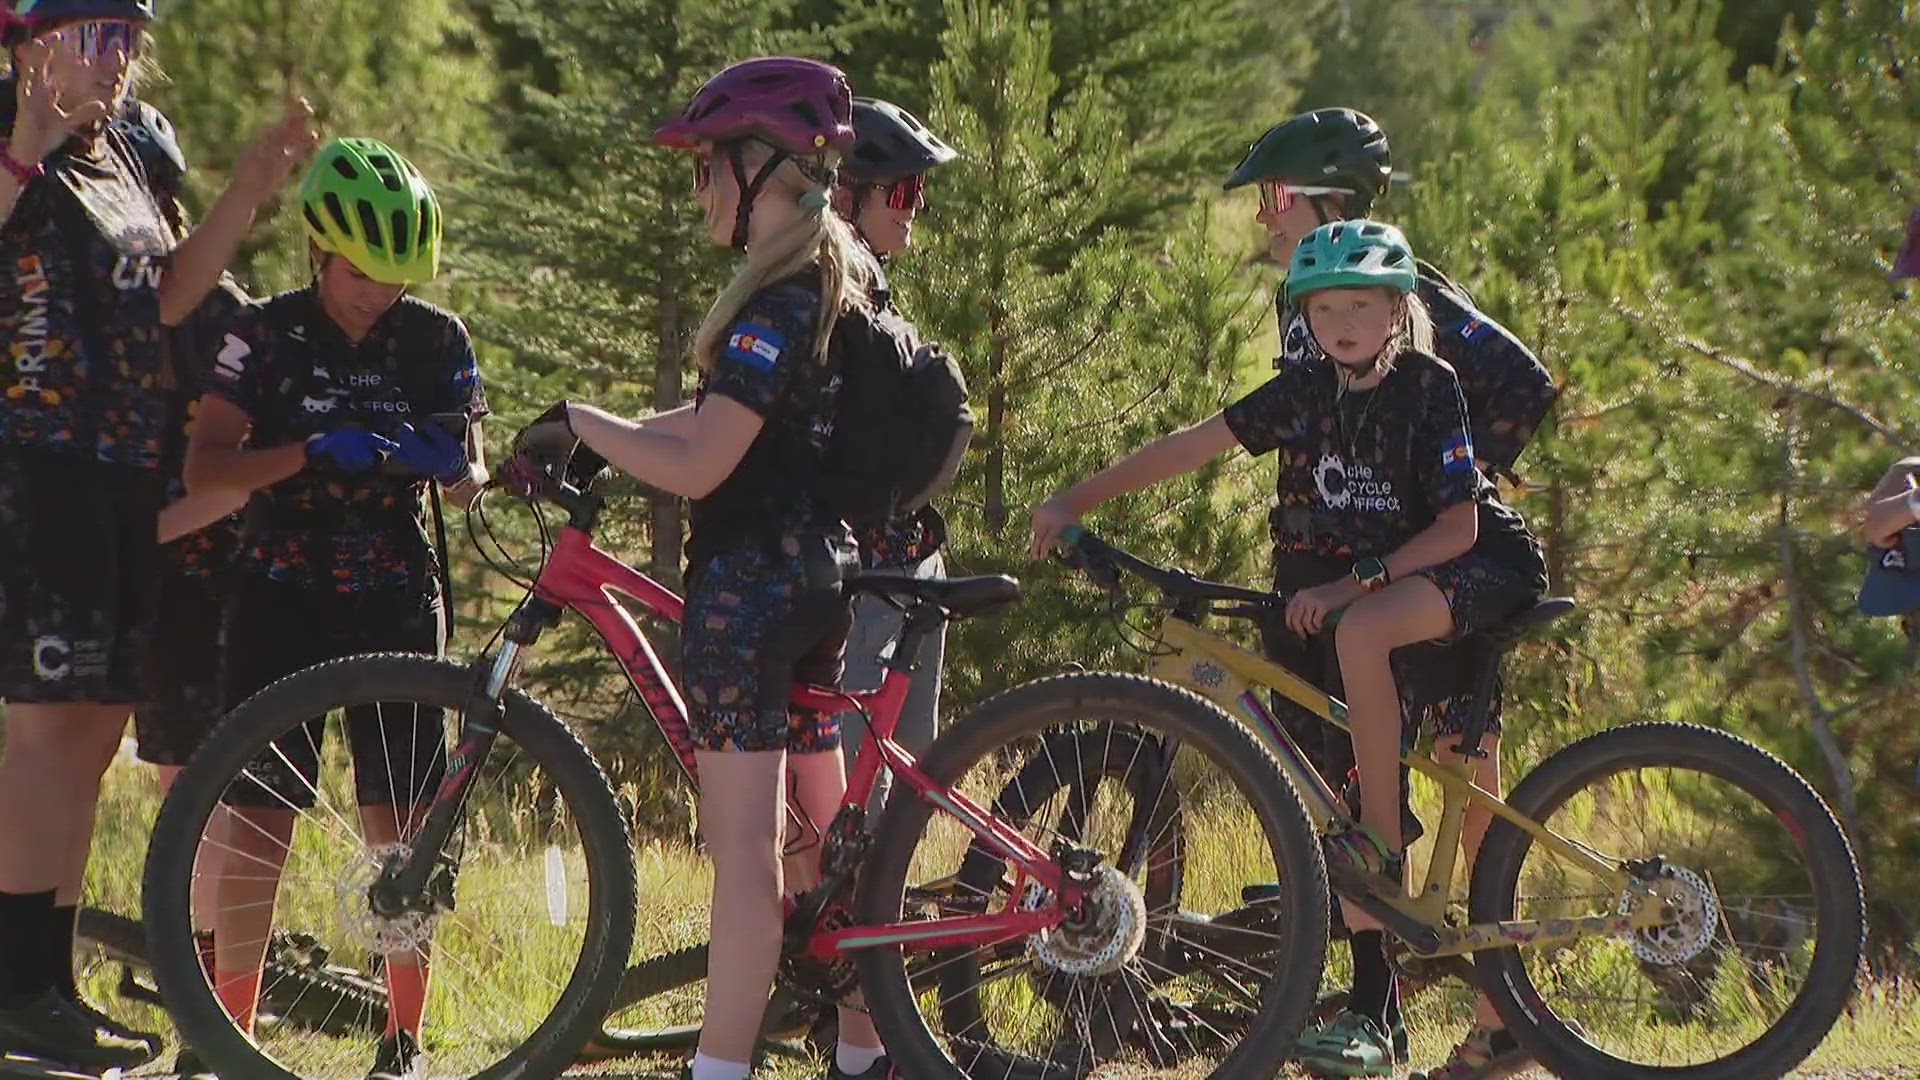 The Cycle Effect provides everything girls need to hit the trails with confidence.